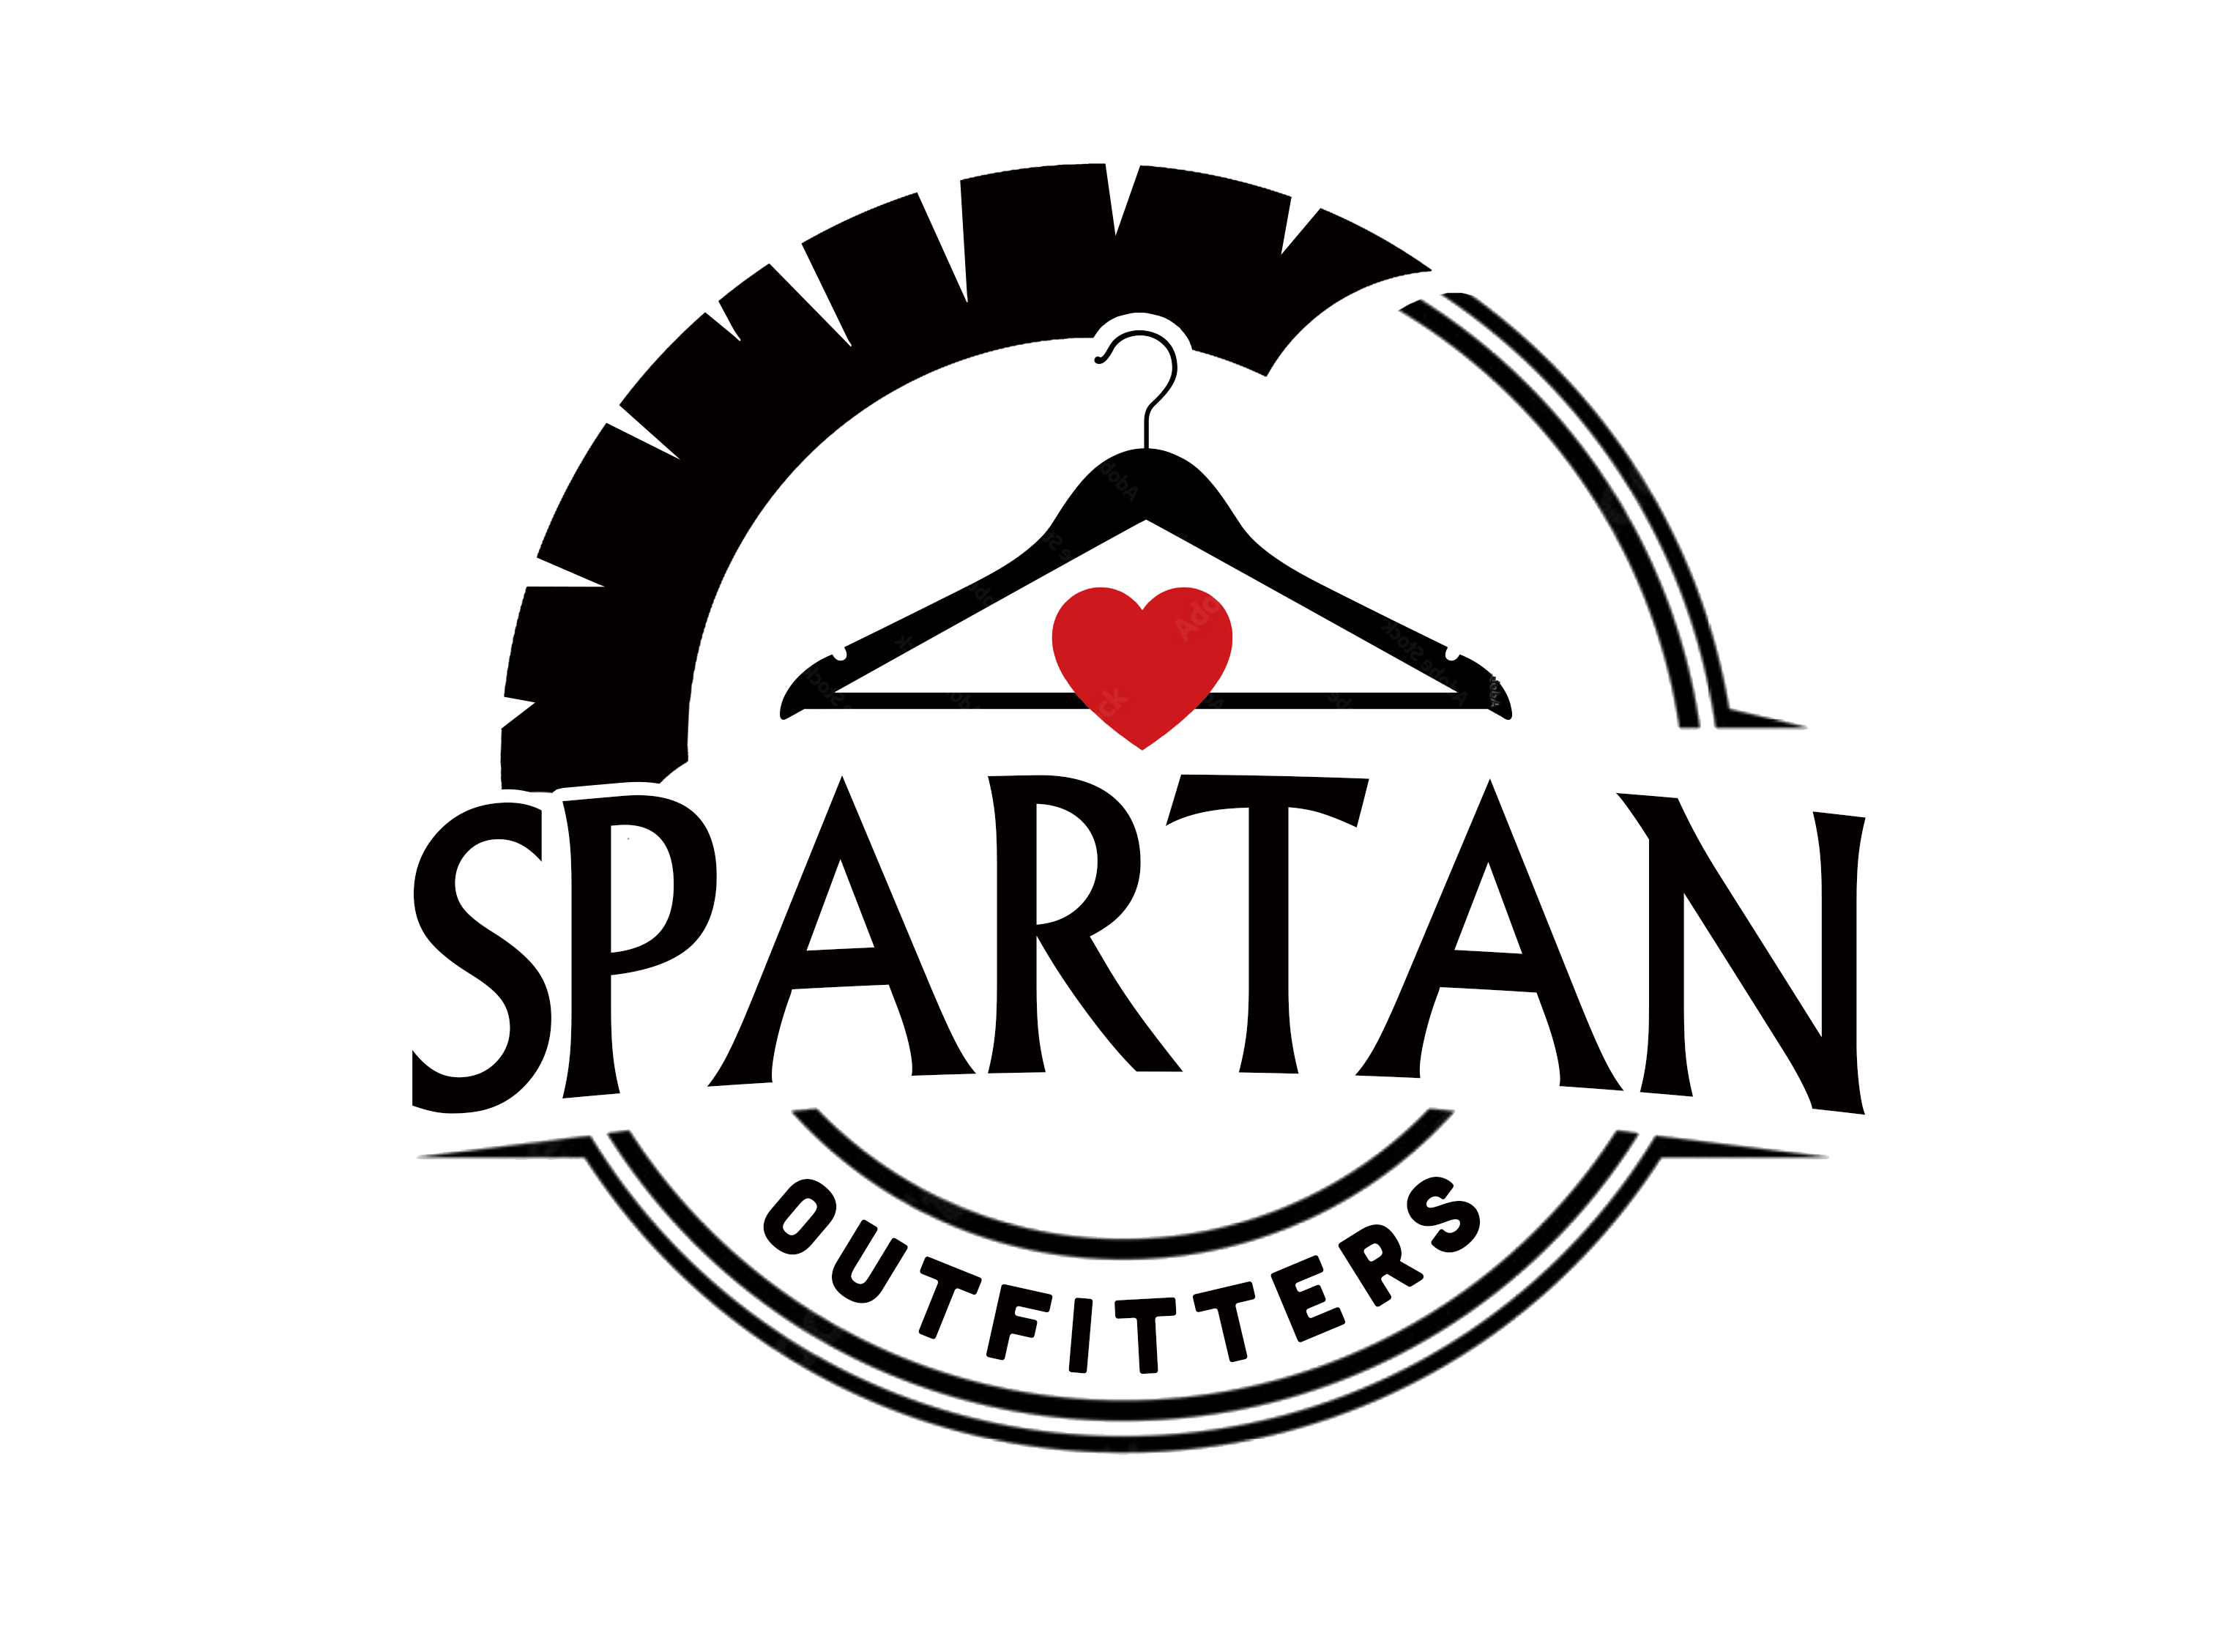 Spartan Outfitters